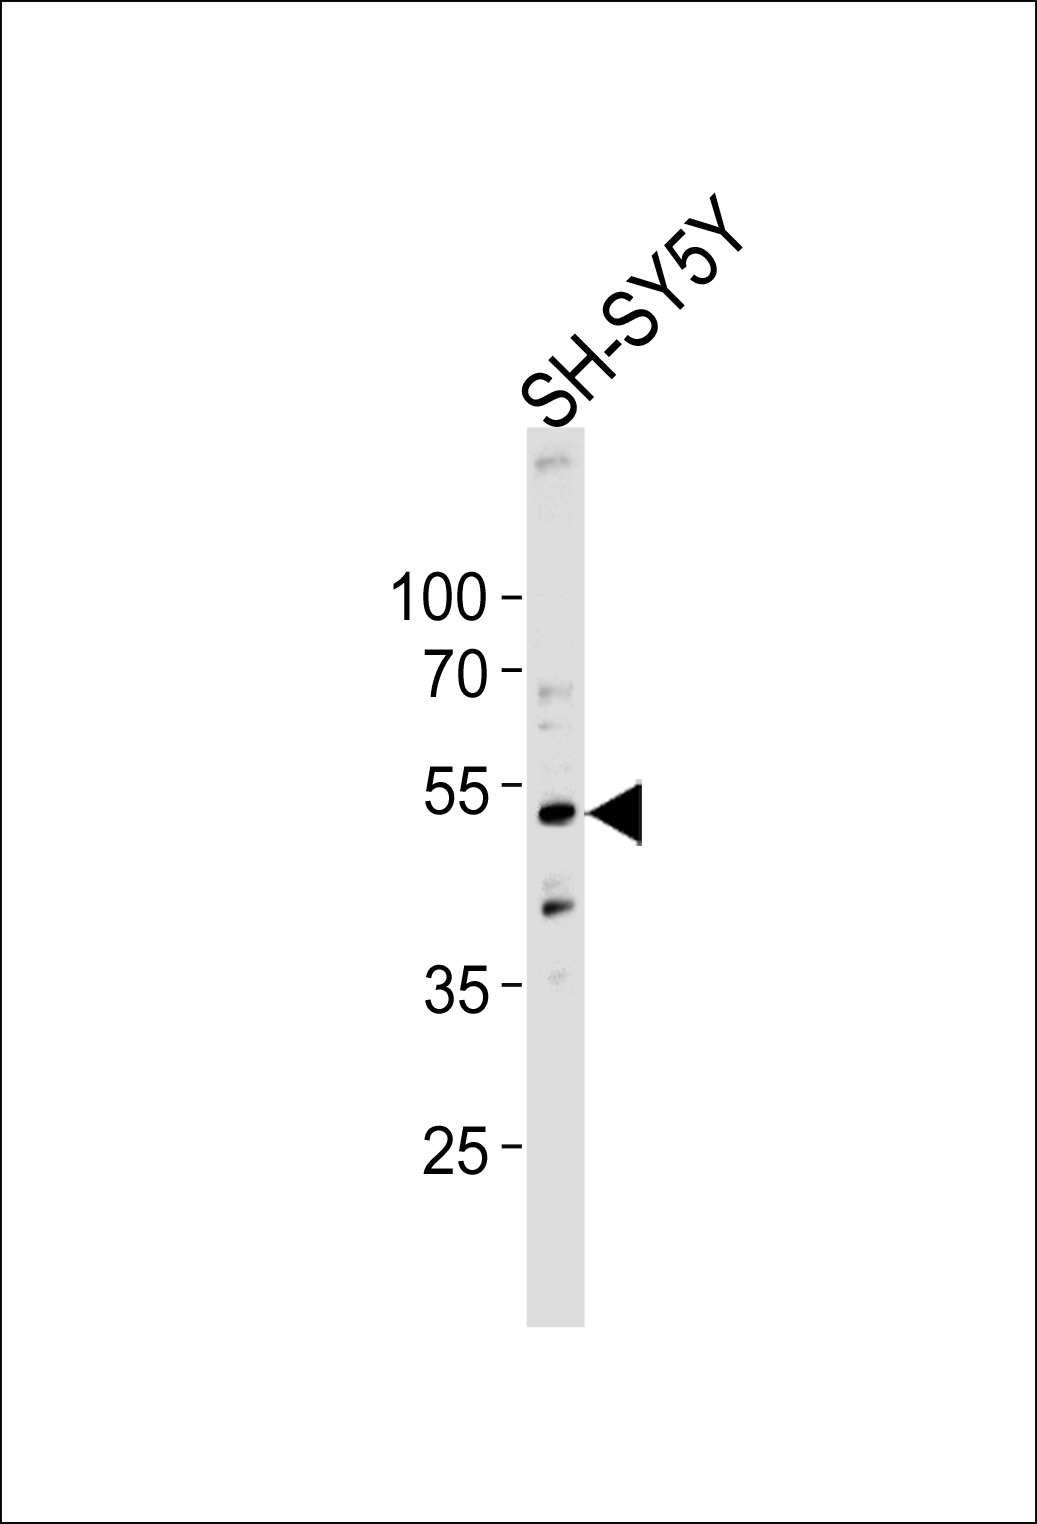 Western blot analysis of lysate from SH-SY5Y cell line, using DCTN2 Antibody (Center)(Cat. #AP12893c). AP12893c was diluted at 1:1000 at each lane. A goat anti-rabbit IgG H&L(HRP) at 1:5000 dilution was used as the secondary antibody. Lysate at 35ug per lane. 